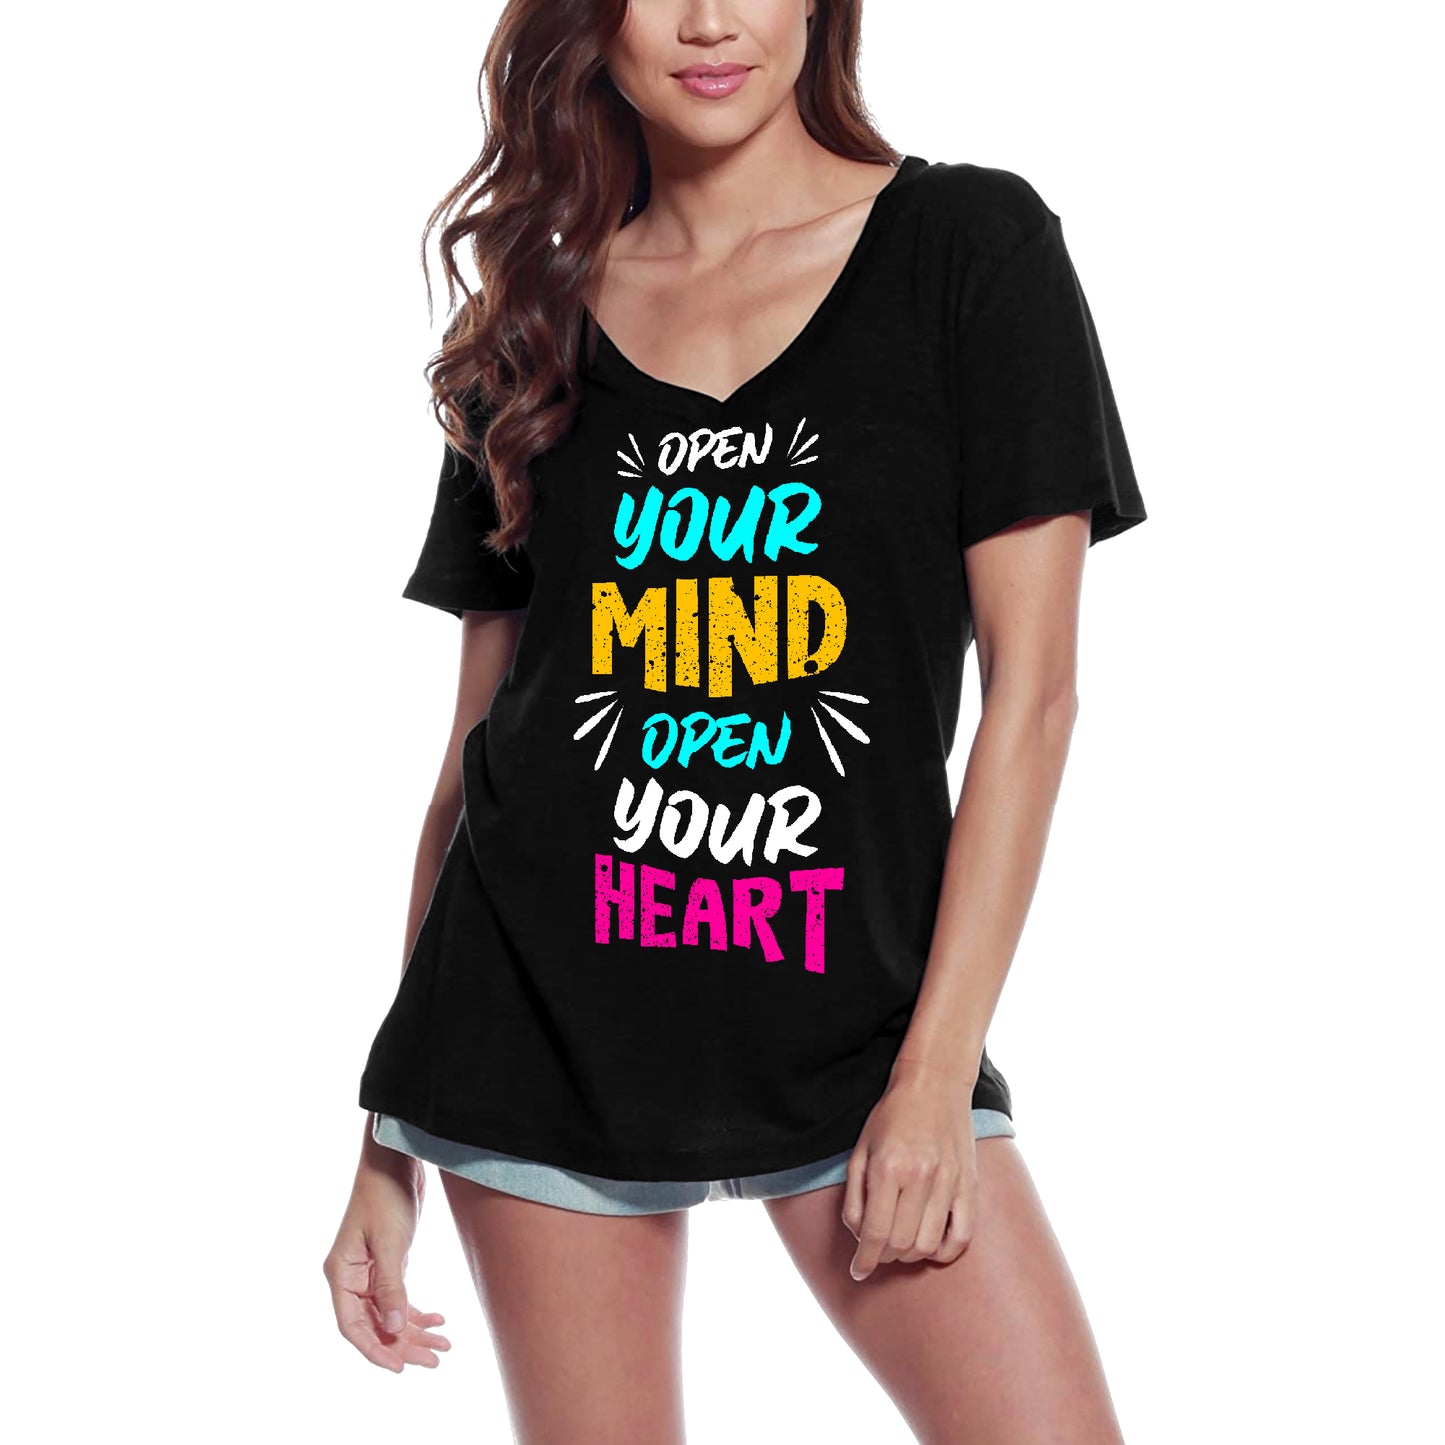 ULTRABASIC Women's T-Shirt Open Your Mind Open Your Heart - Motivational Quote